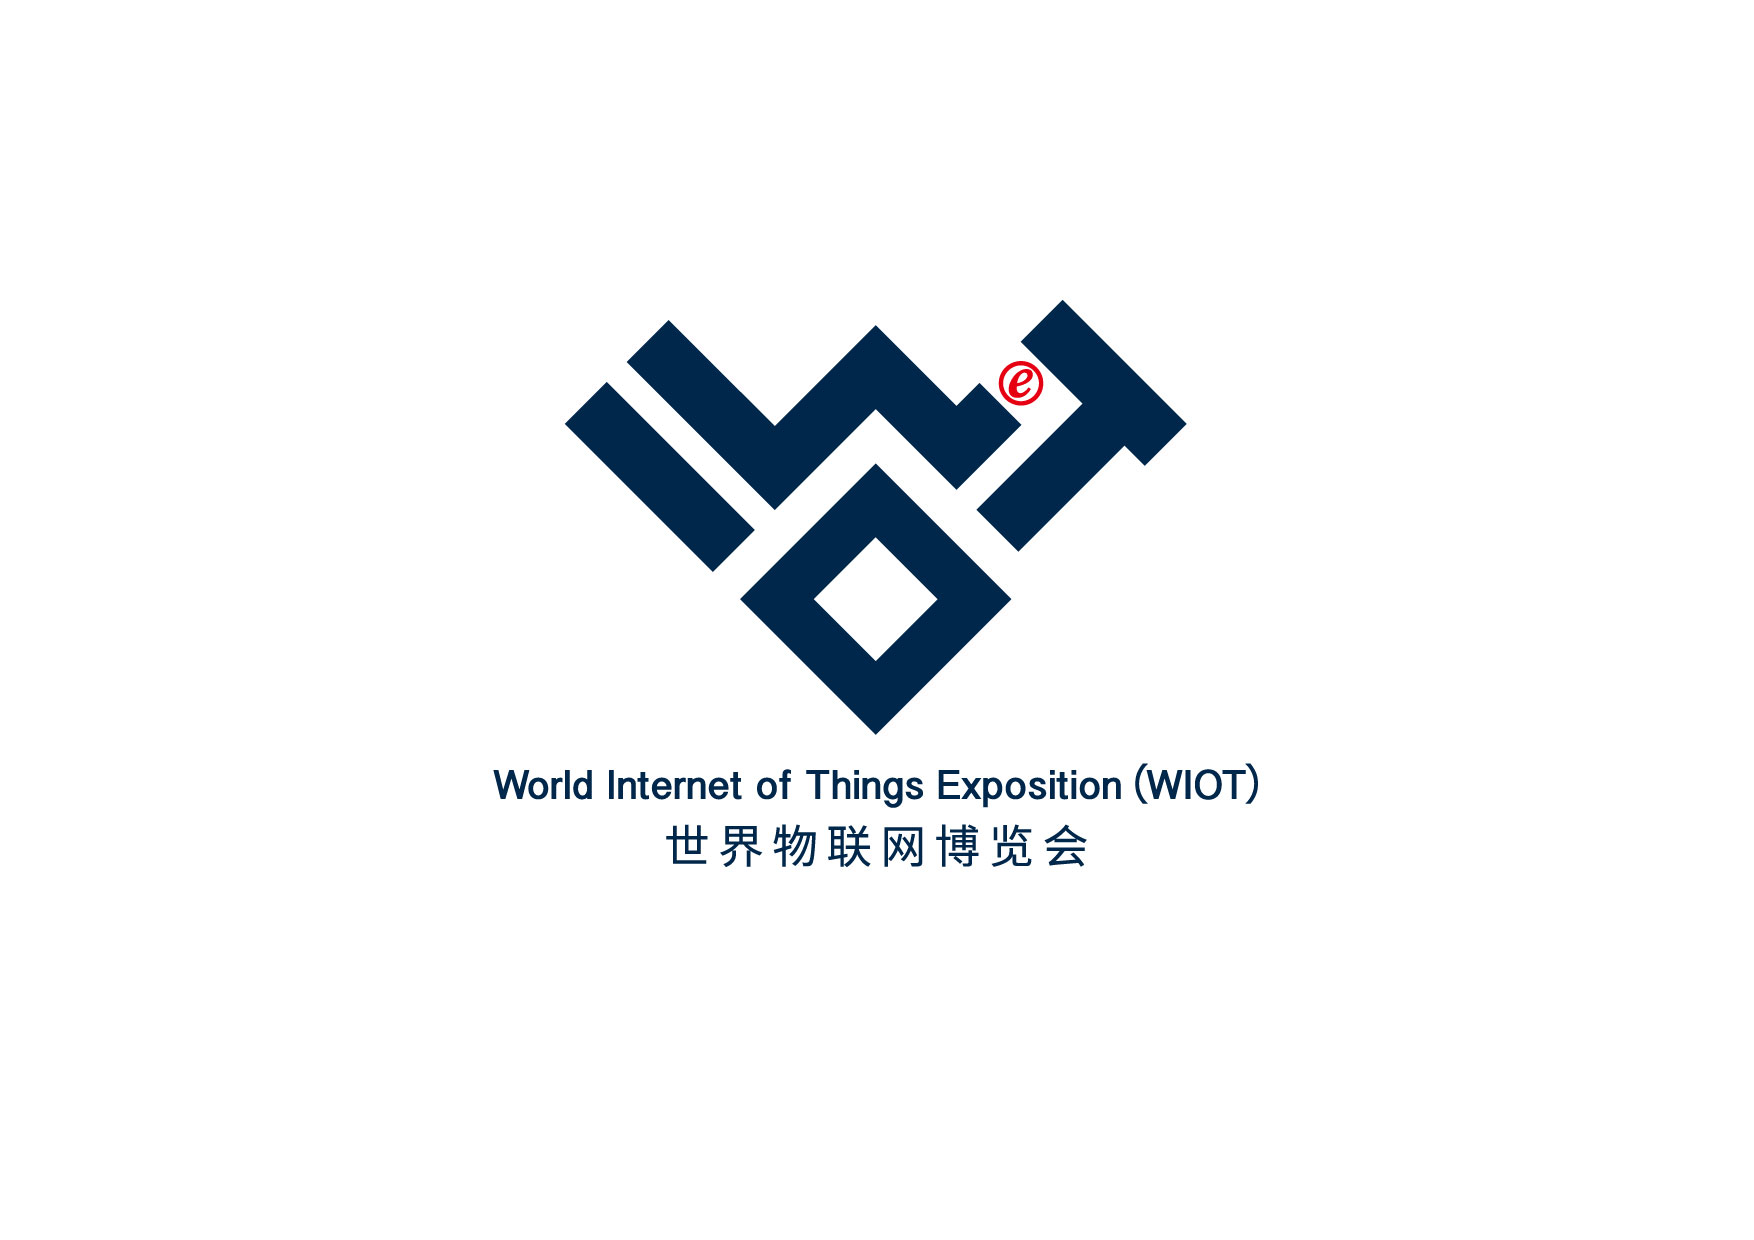 Wuxi gears up for 2017 World Internet of Things Expo